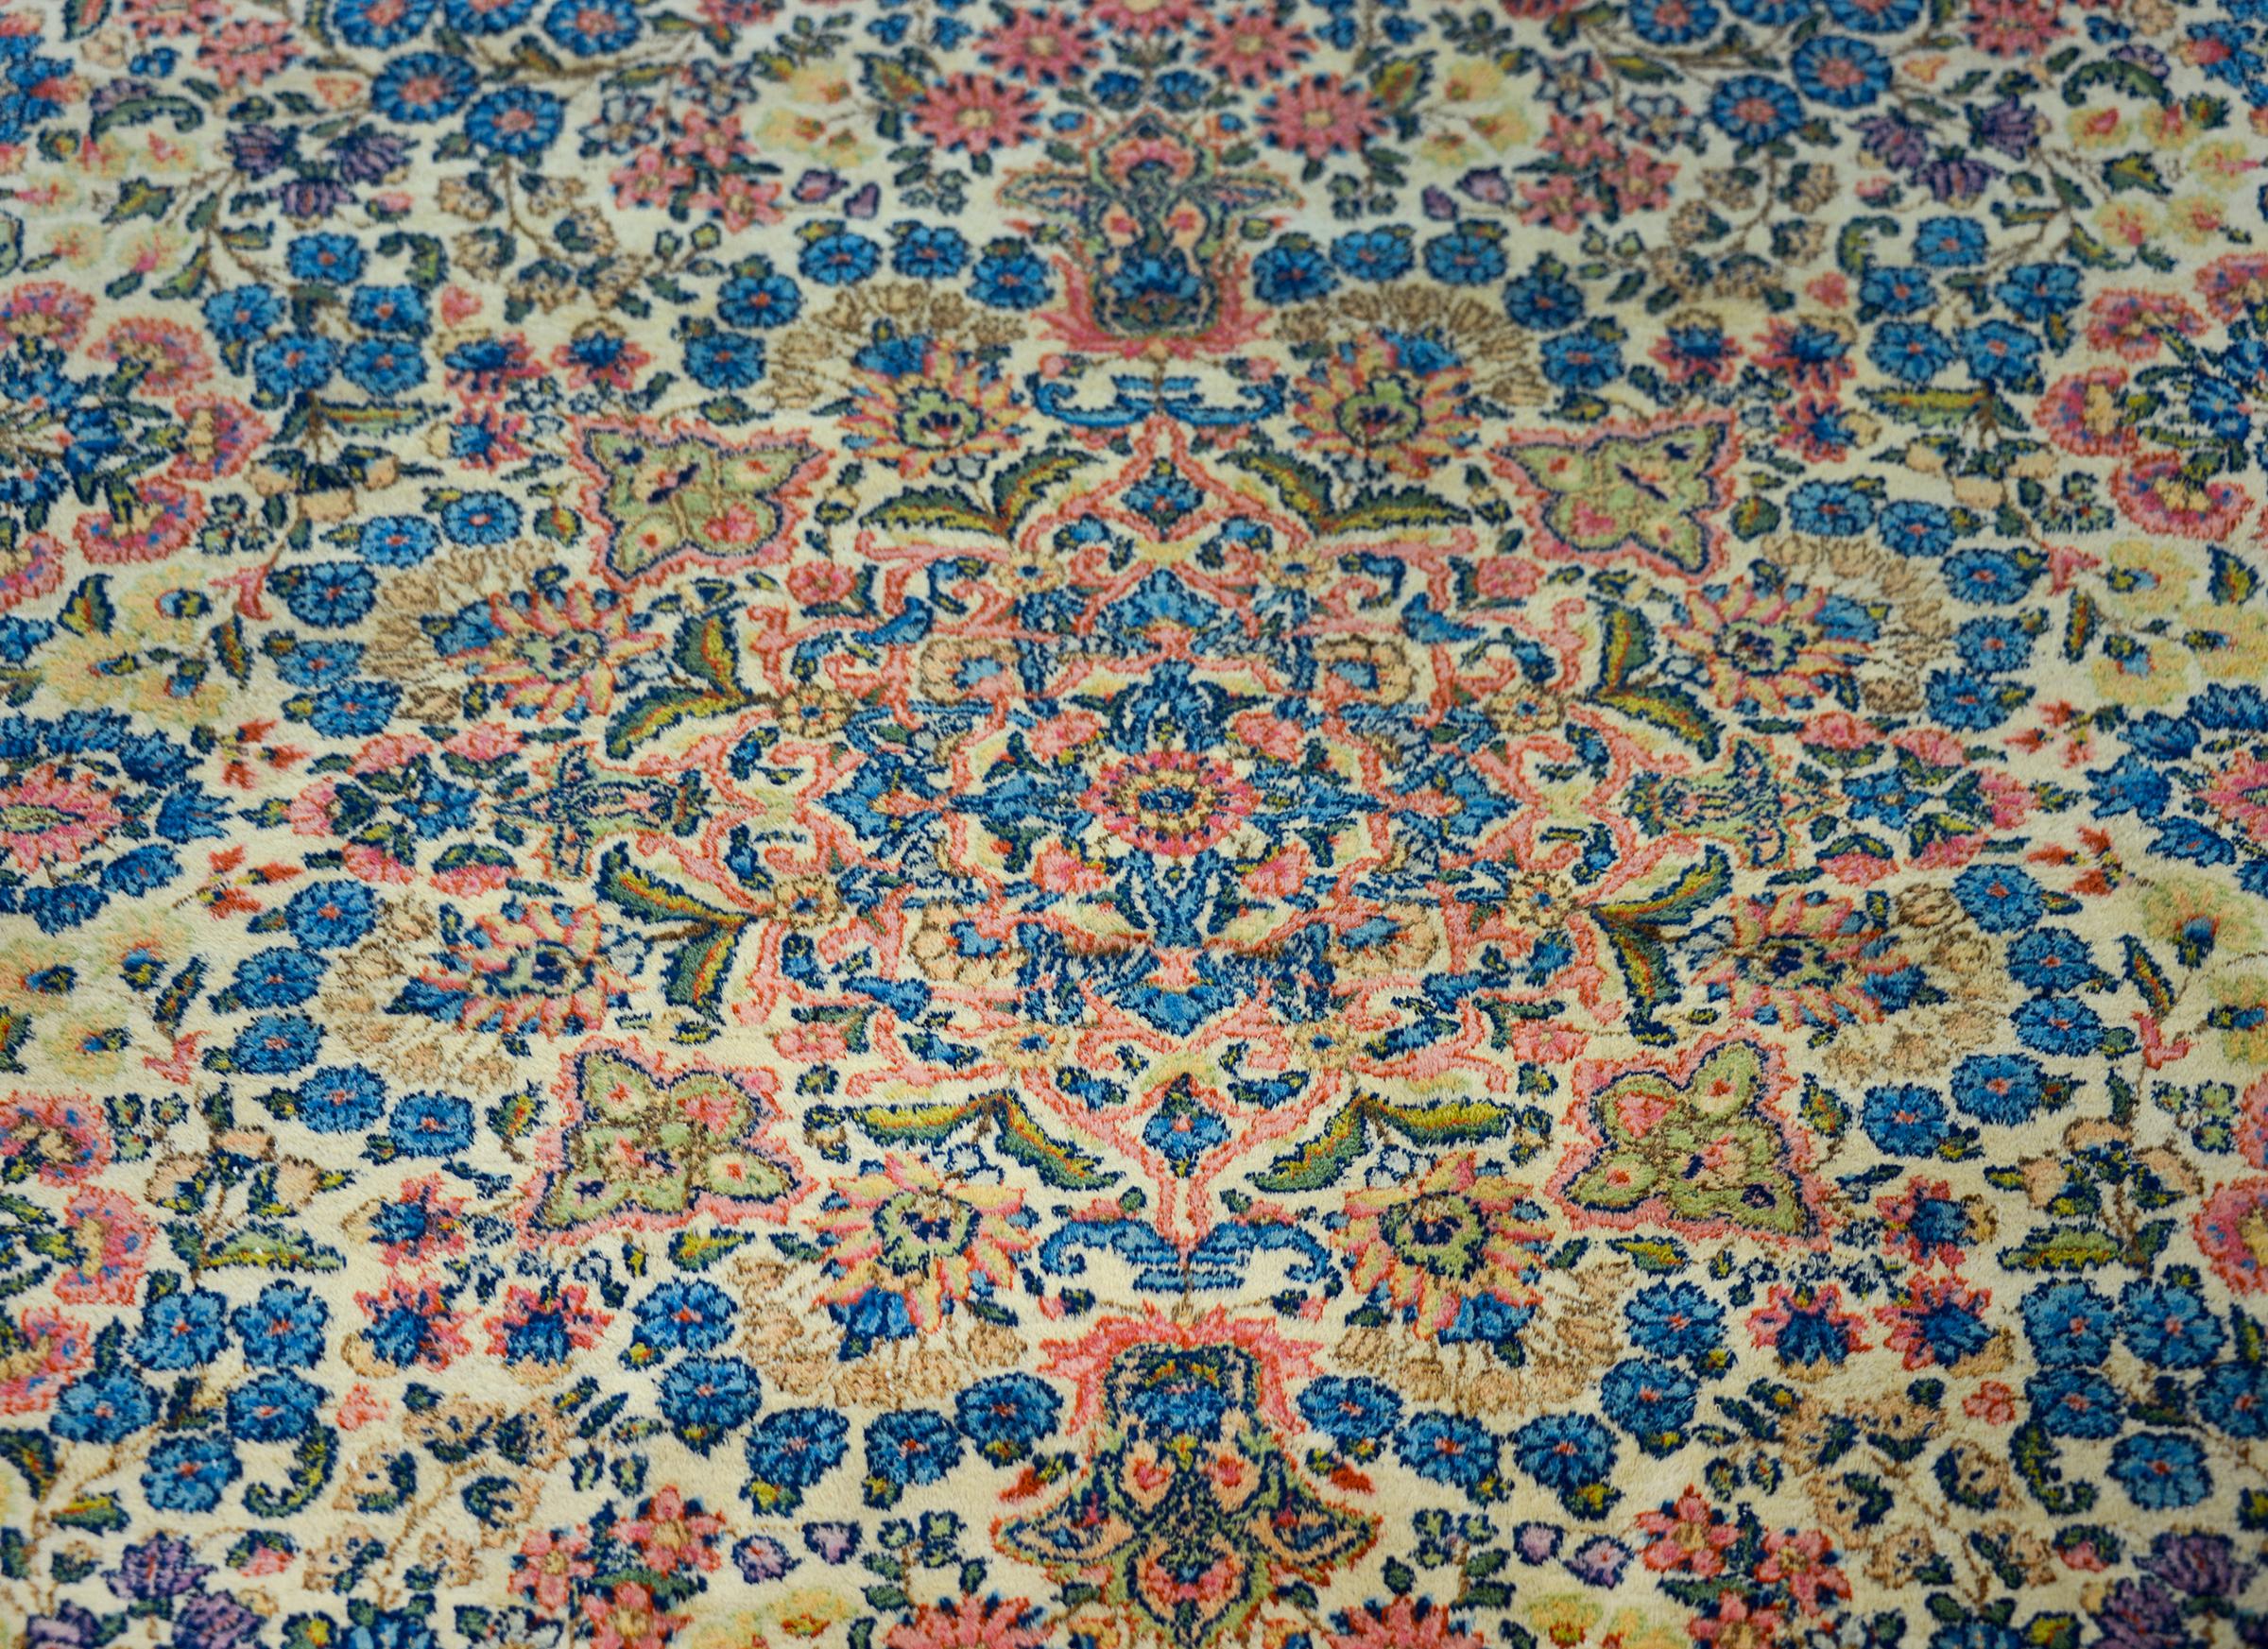 A wonderful early 20th century Persian Kirman rug with an incredible all-over mirrored floral cluster pattern containing myriad flowers and woven in myriad colors including traditional Kirman pinks, indigos, creams, and greens. The border is